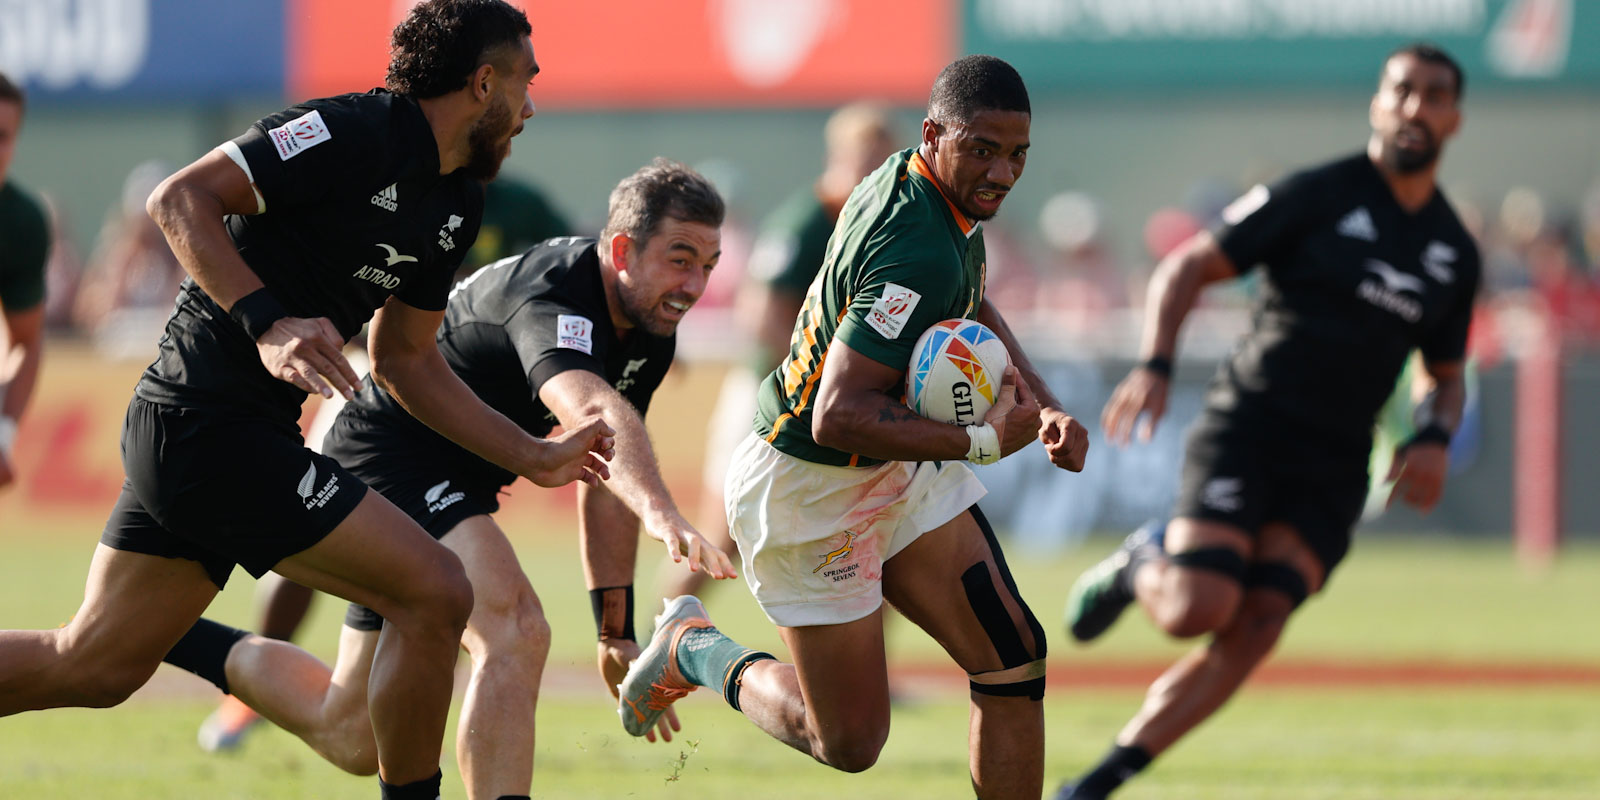 Shilton van Wyk on his way to score the match winner against New Zealand Sevens.